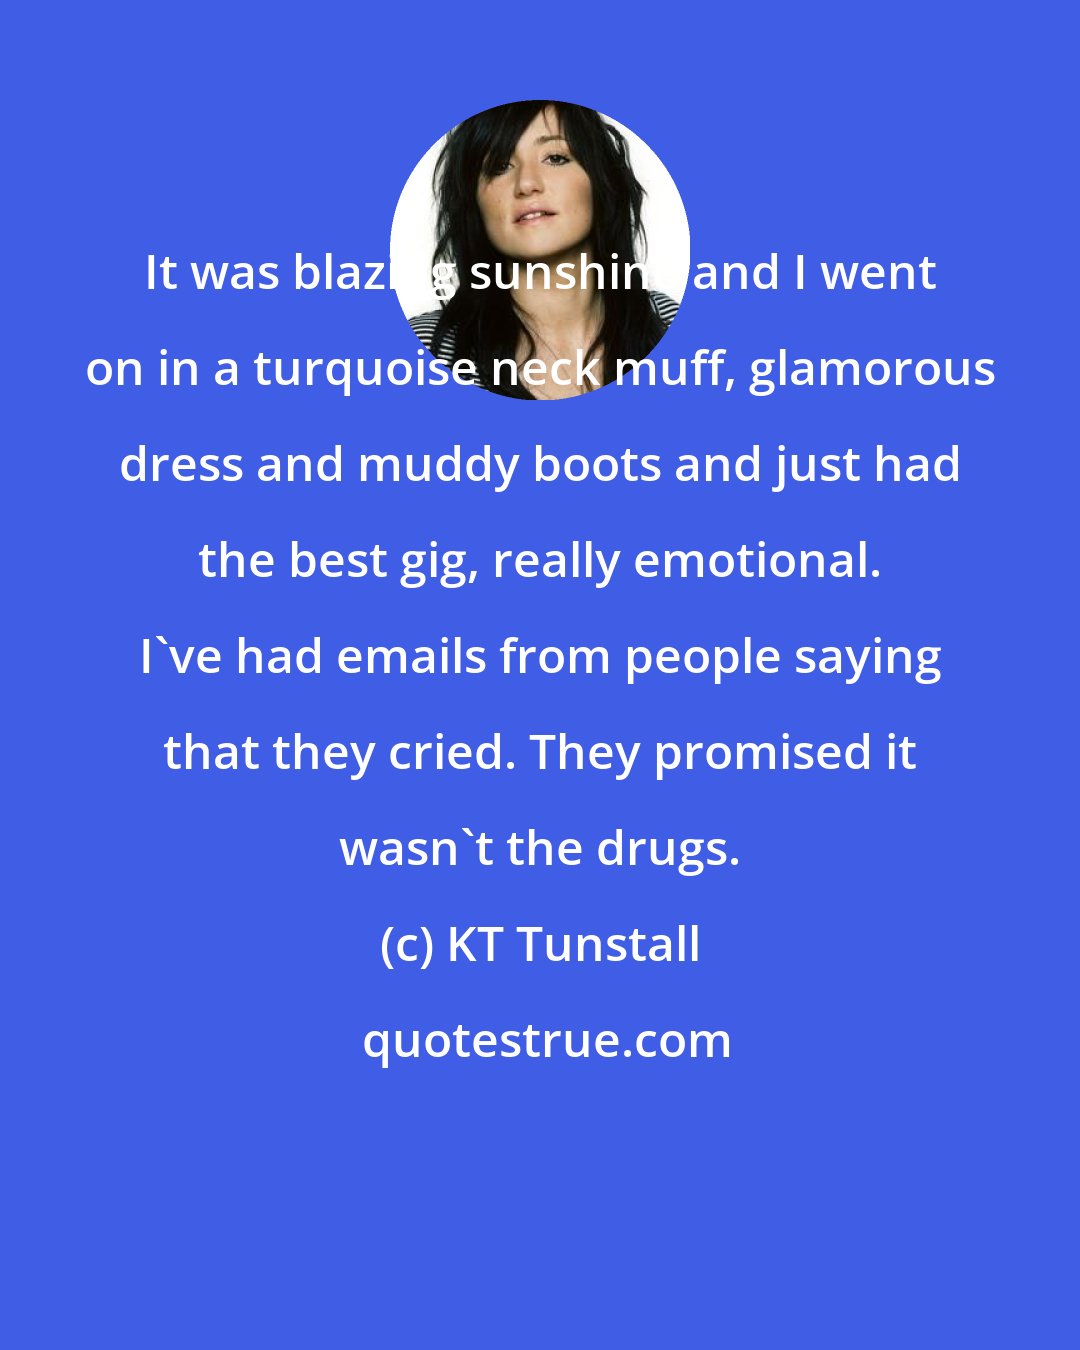 KT Tunstall: It was blazing sunshine and I went on in a turquoise neck muff, glamorous dress and muddy boots and just had the best gig, really emotional. I've had emails from people saying that they cried. They promised it wasn't the drugs.